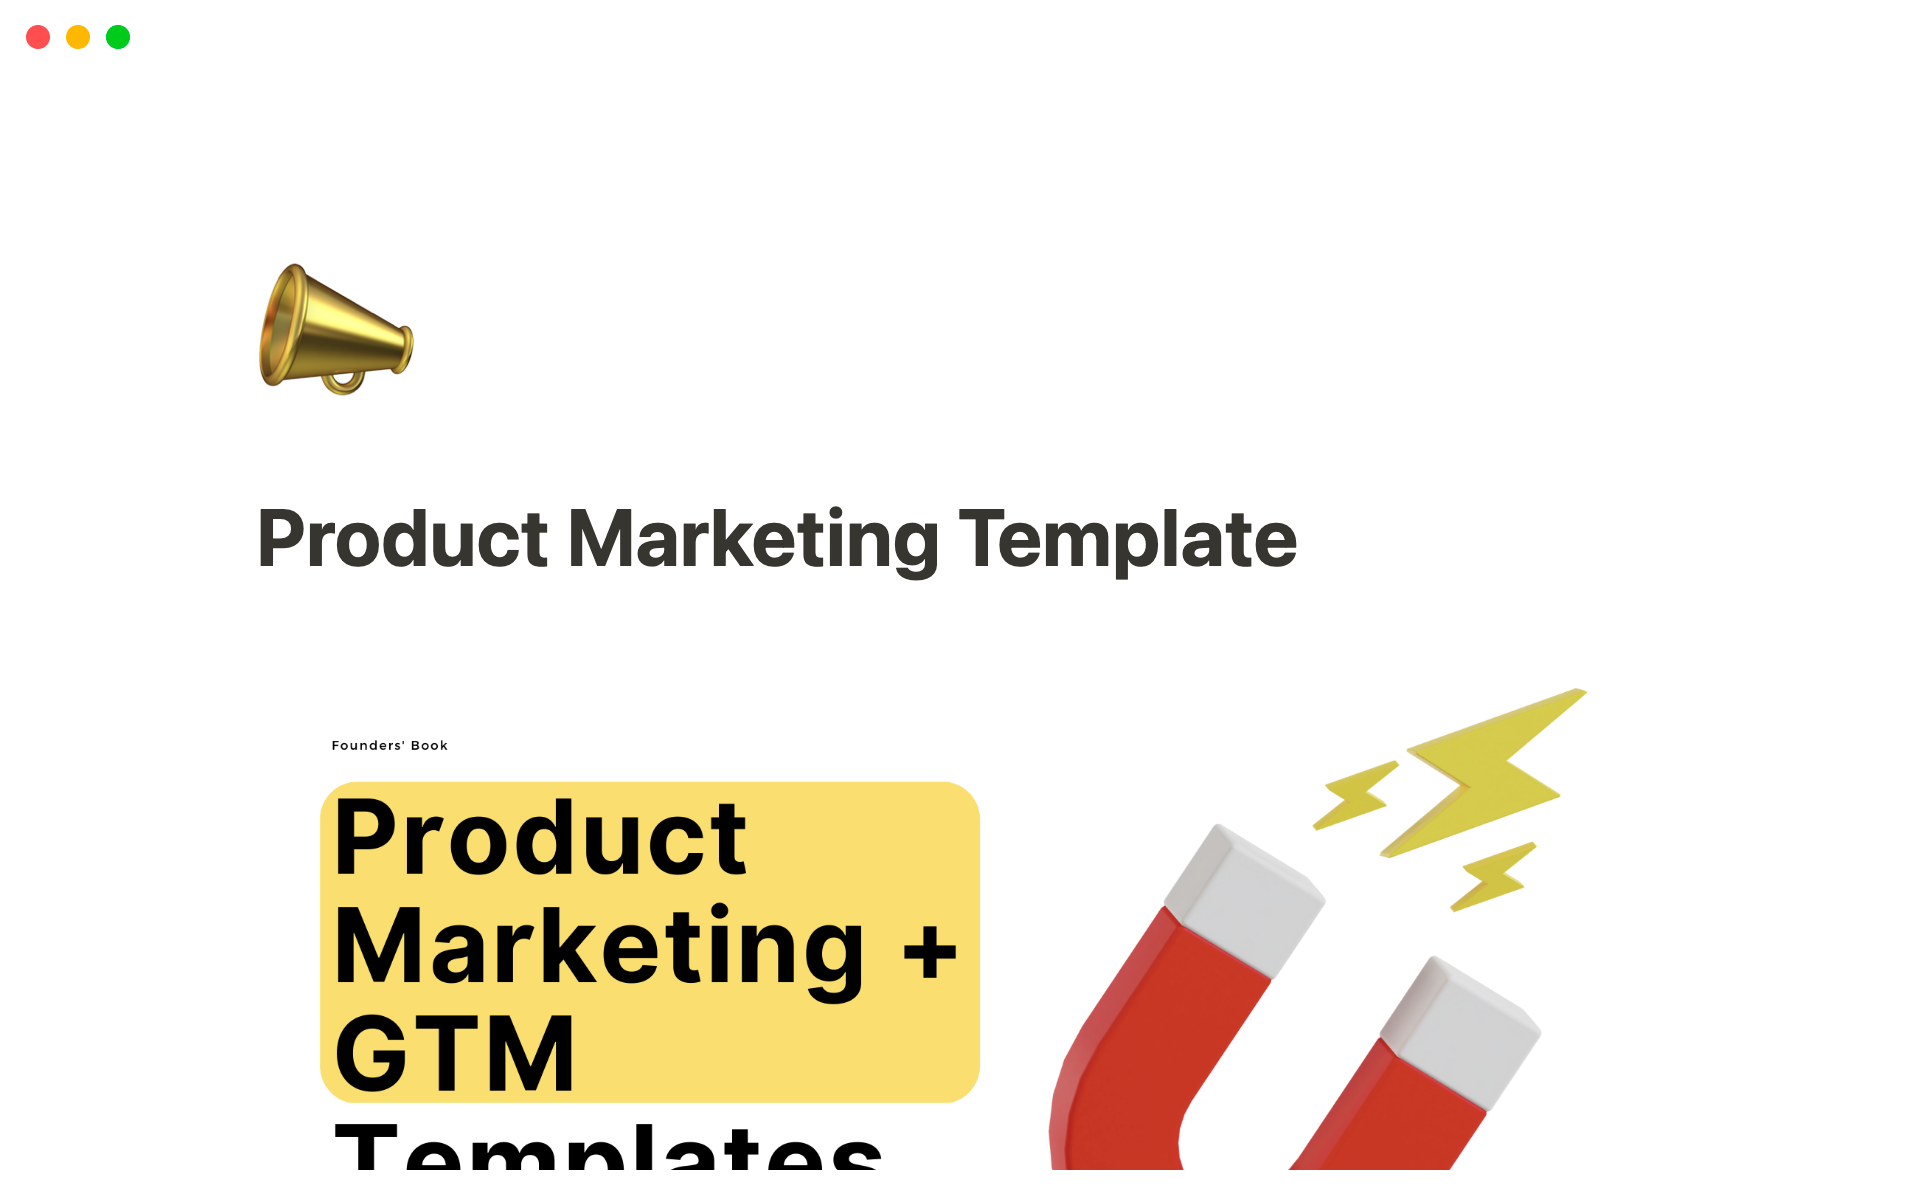 Simple and easy-to-use product marketing + GTM templates for founders, early-stage startups and product teams.